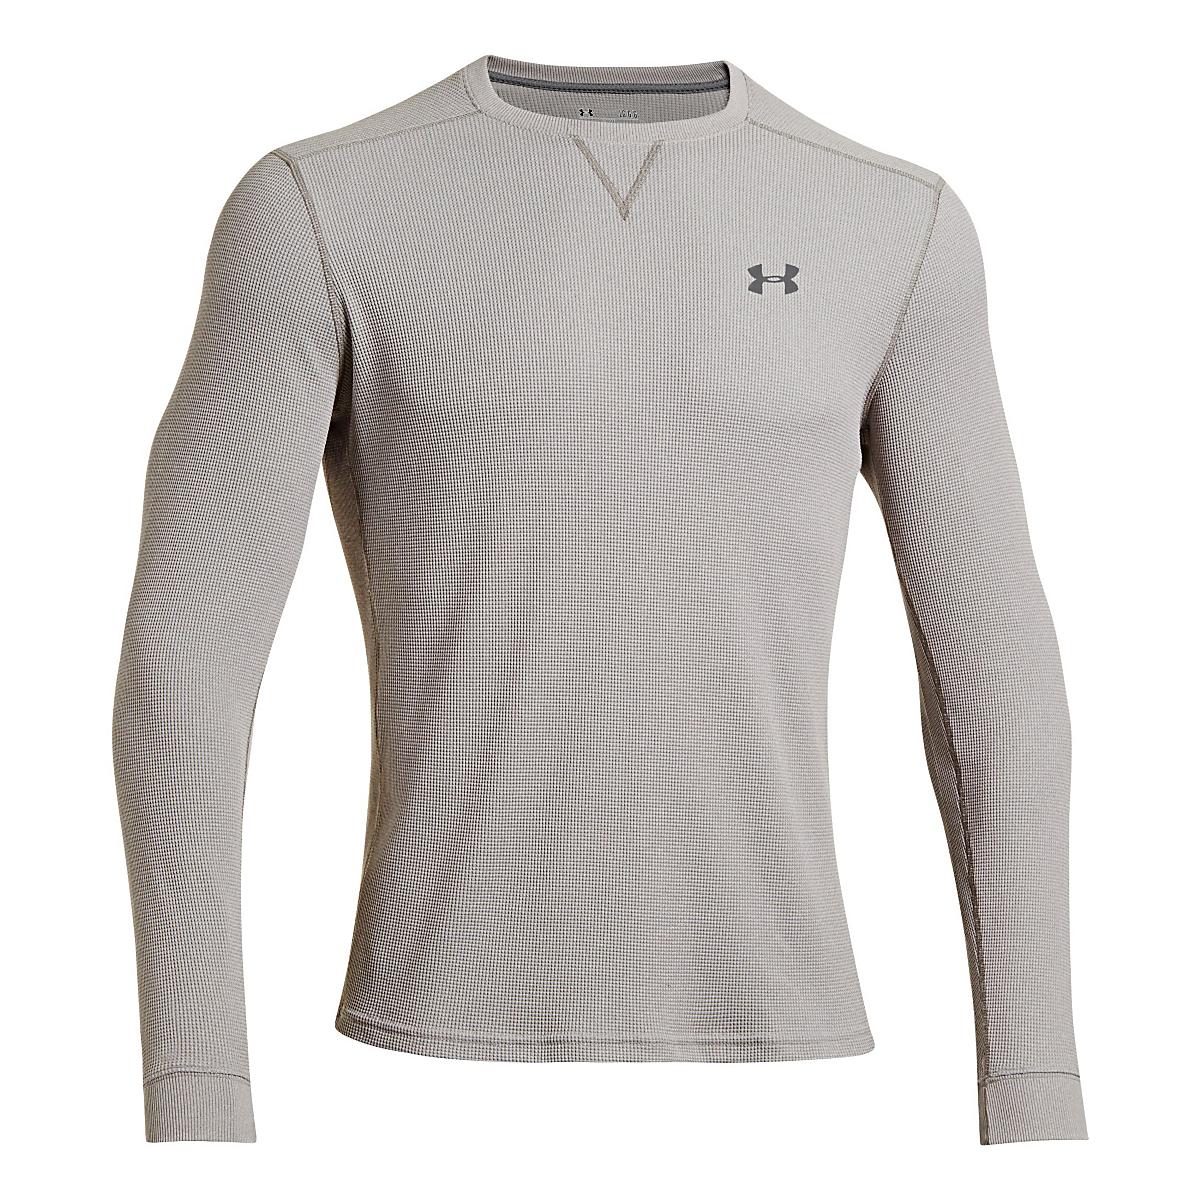 Mens Under Armour Amplify Thermal Long Sleeve Technical Tops at Road ...